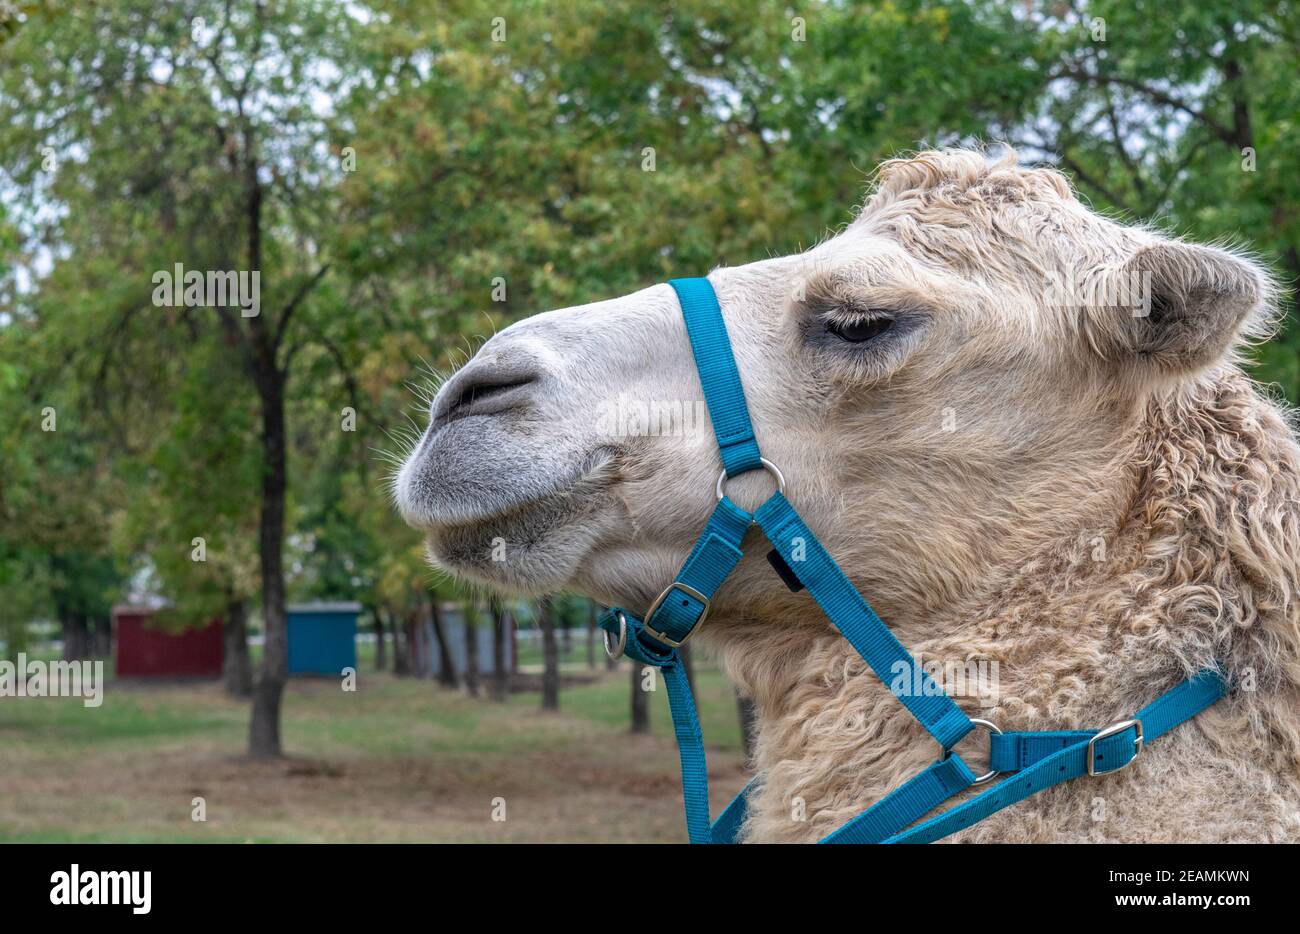 A two humped camel in the city park. Camel walking in the park Stock Photo